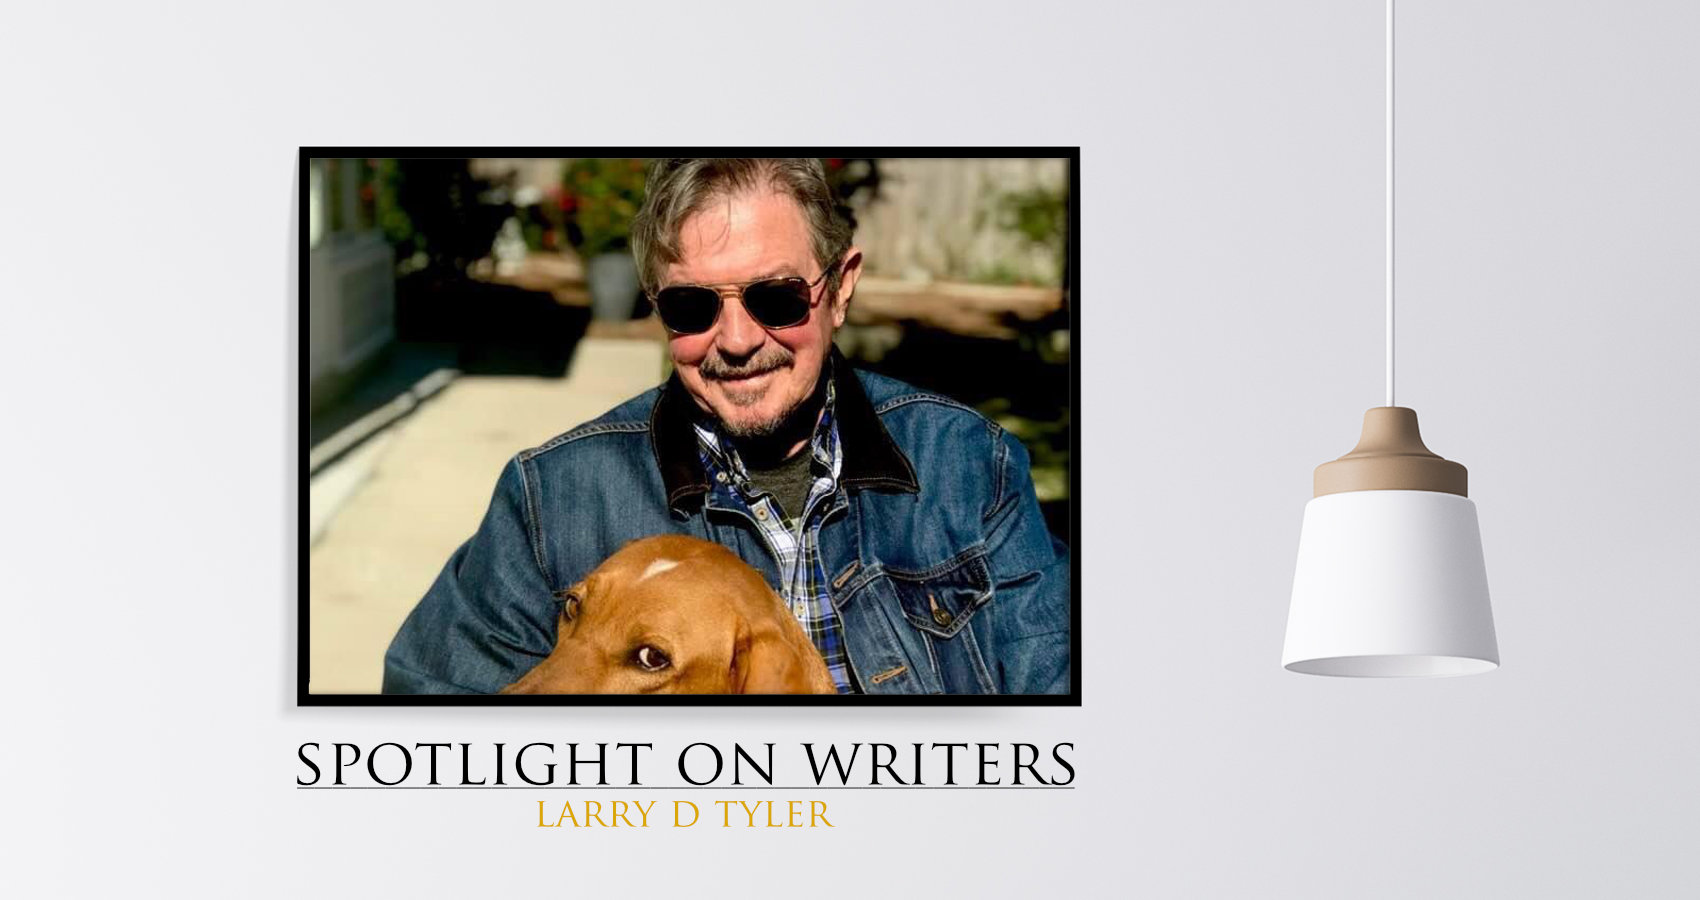 Spotlight On Writers - Larry D Tyler, interview at Spillwords.com